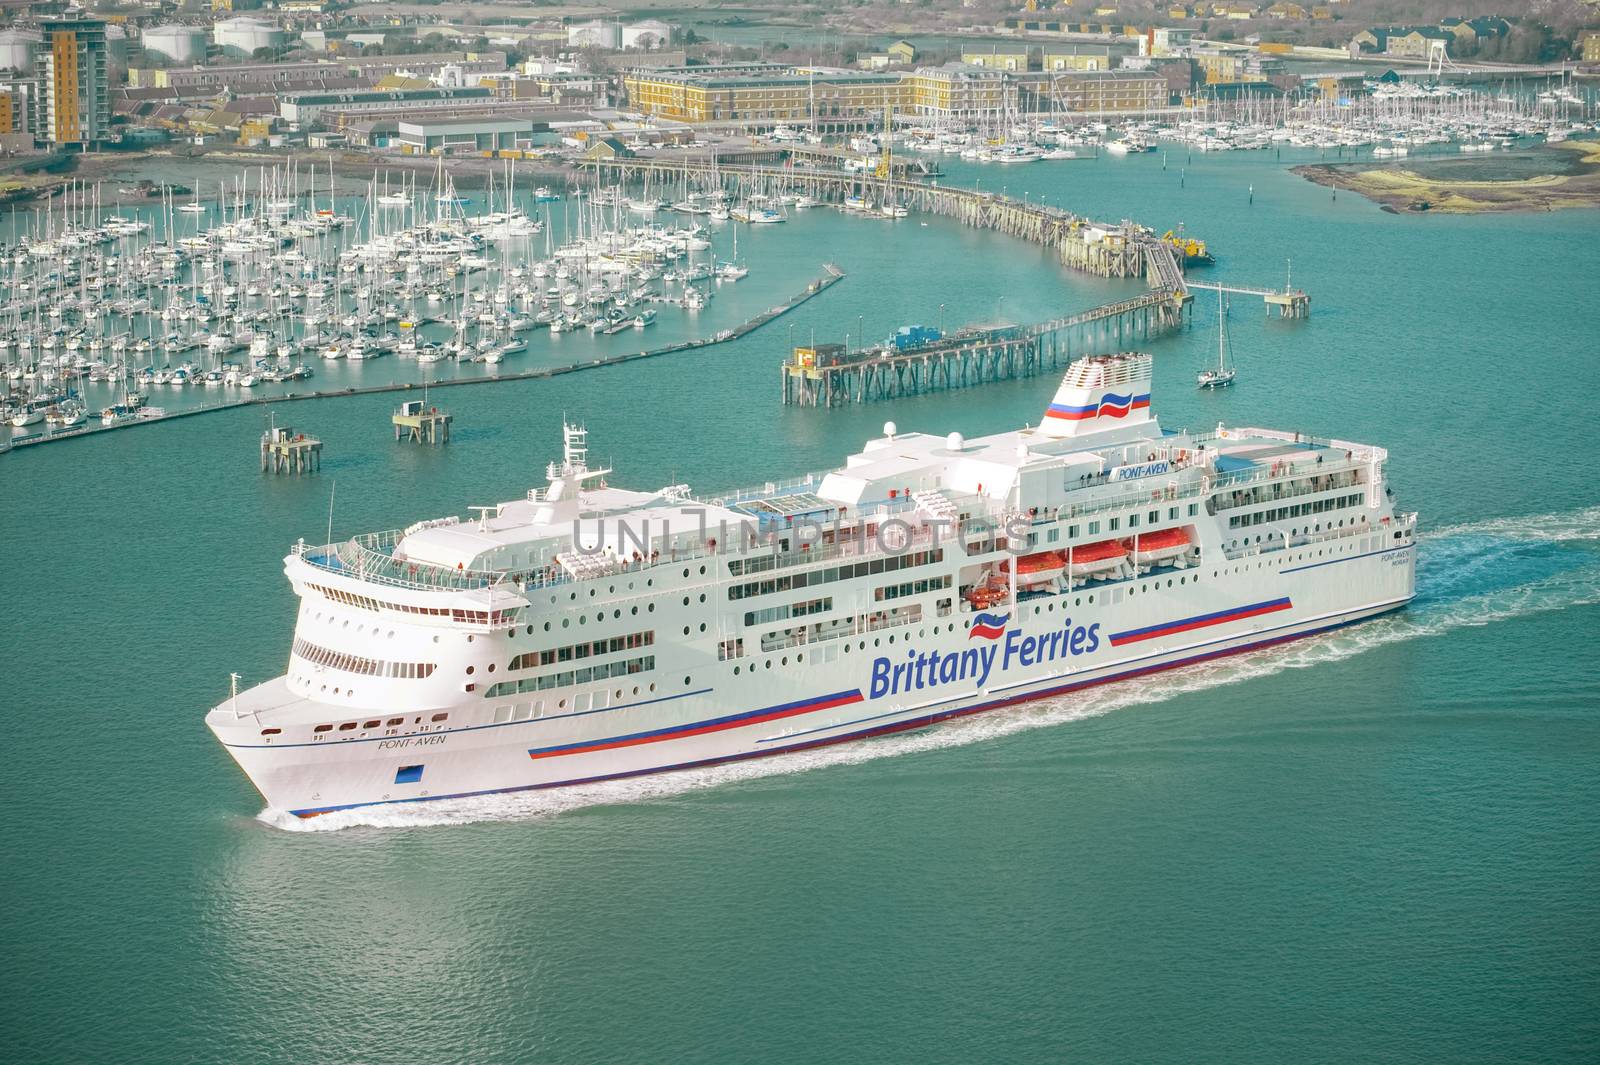 Portsmouth, UK - February 1, 2012: Brittany Ferries 41,700 tonne ship Pont-Aven leaving the UK port of Portsmouth on a cross-channel trip to mainland Europe.